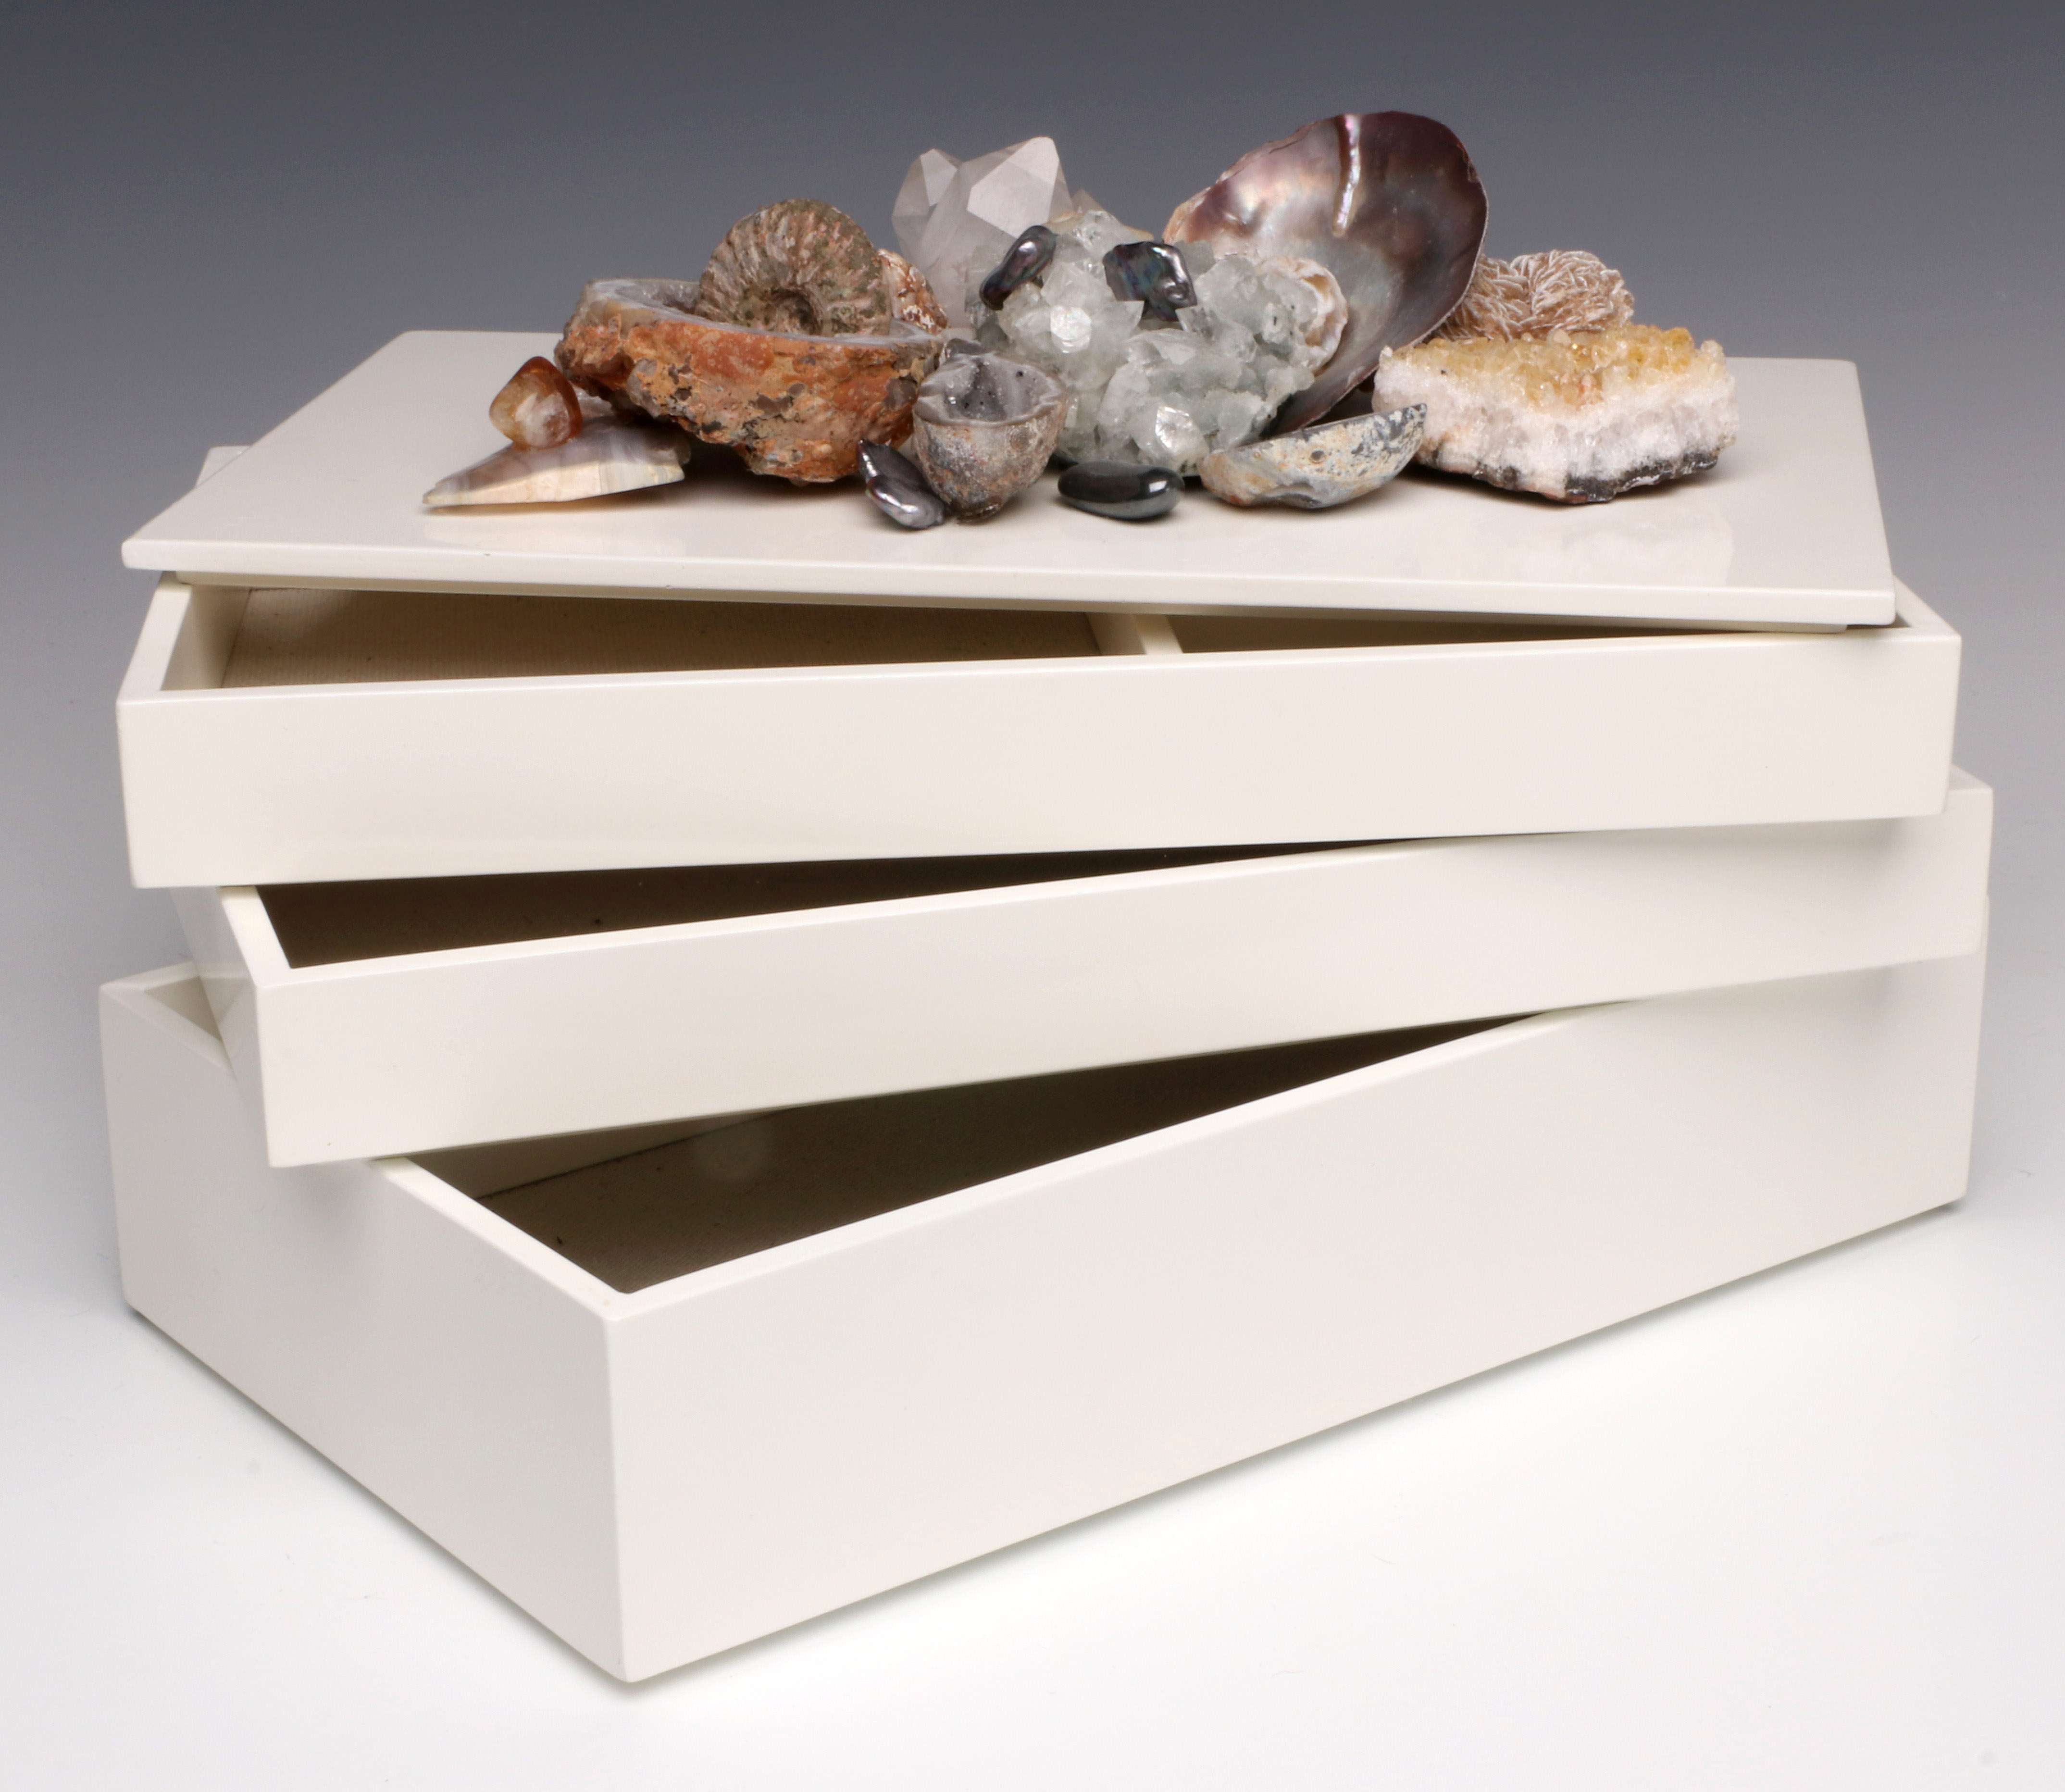 A BRENDA HOUSTON LACQUER BOX WITH SHELL AND GEODES